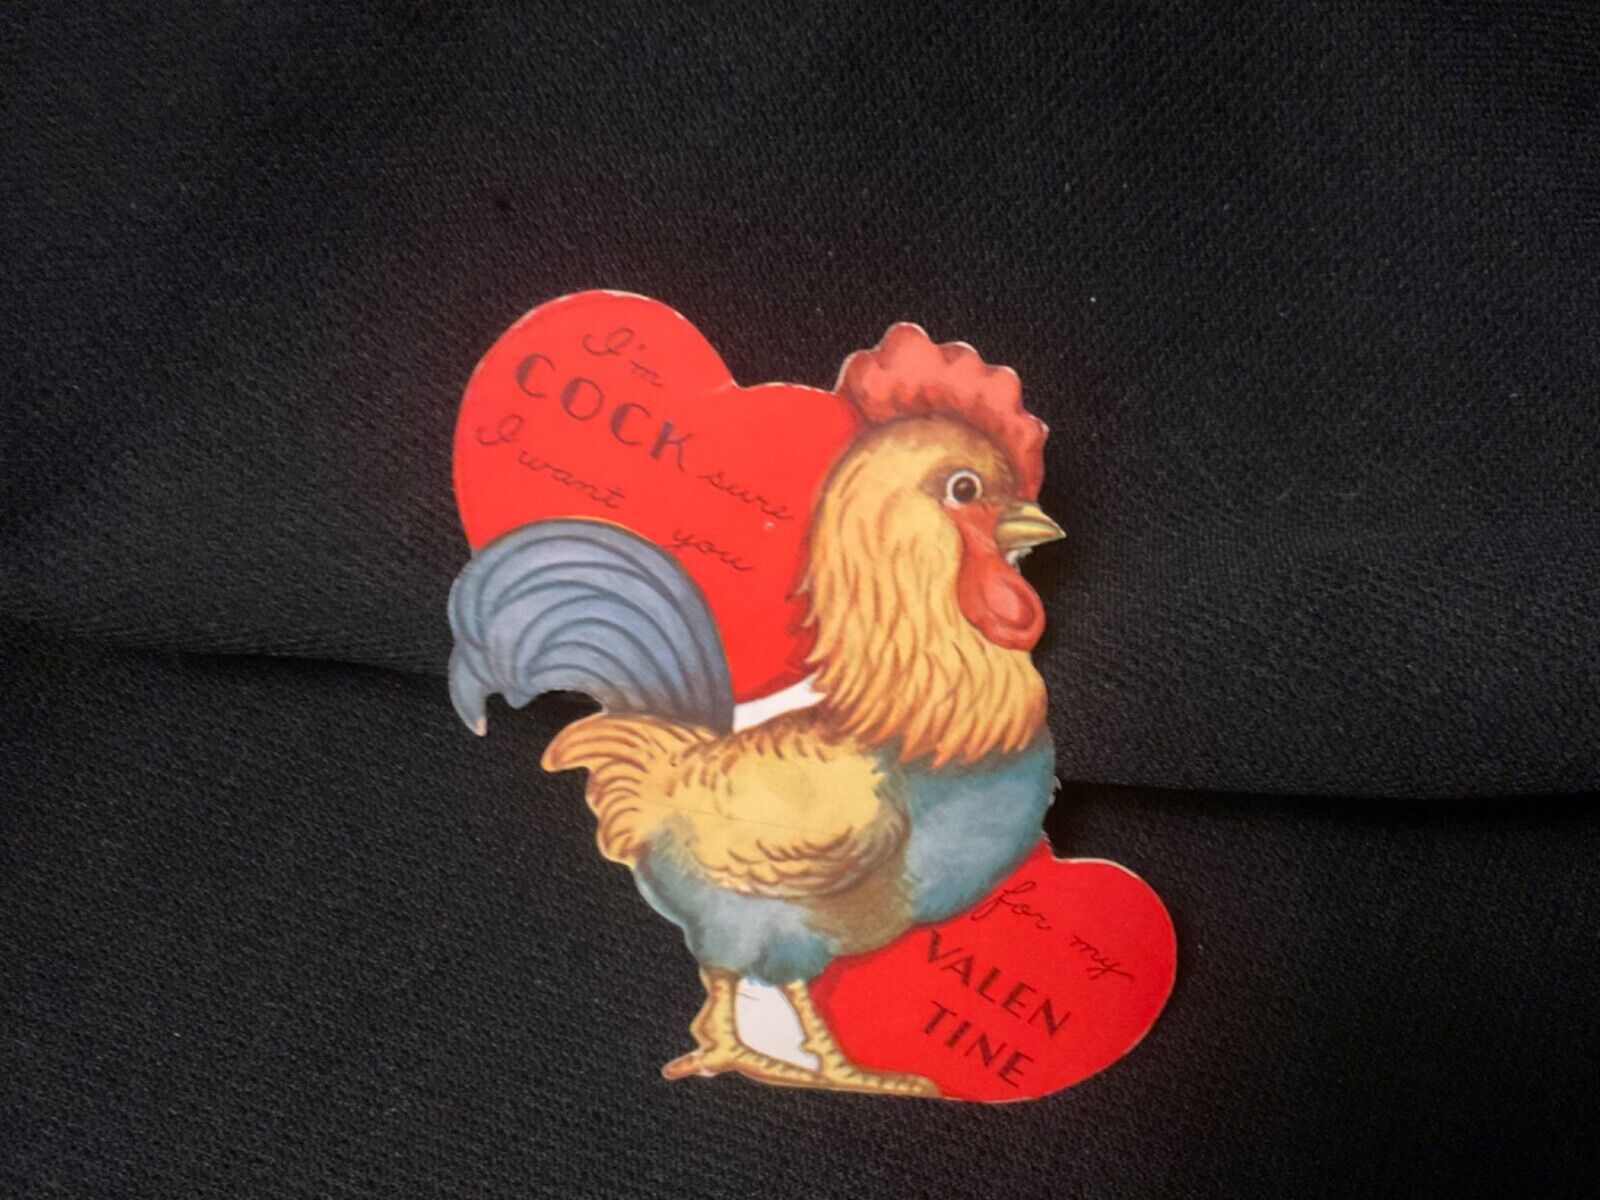 Vintage Rooster Cock Valentine Card c. 1940s a bit suggestive